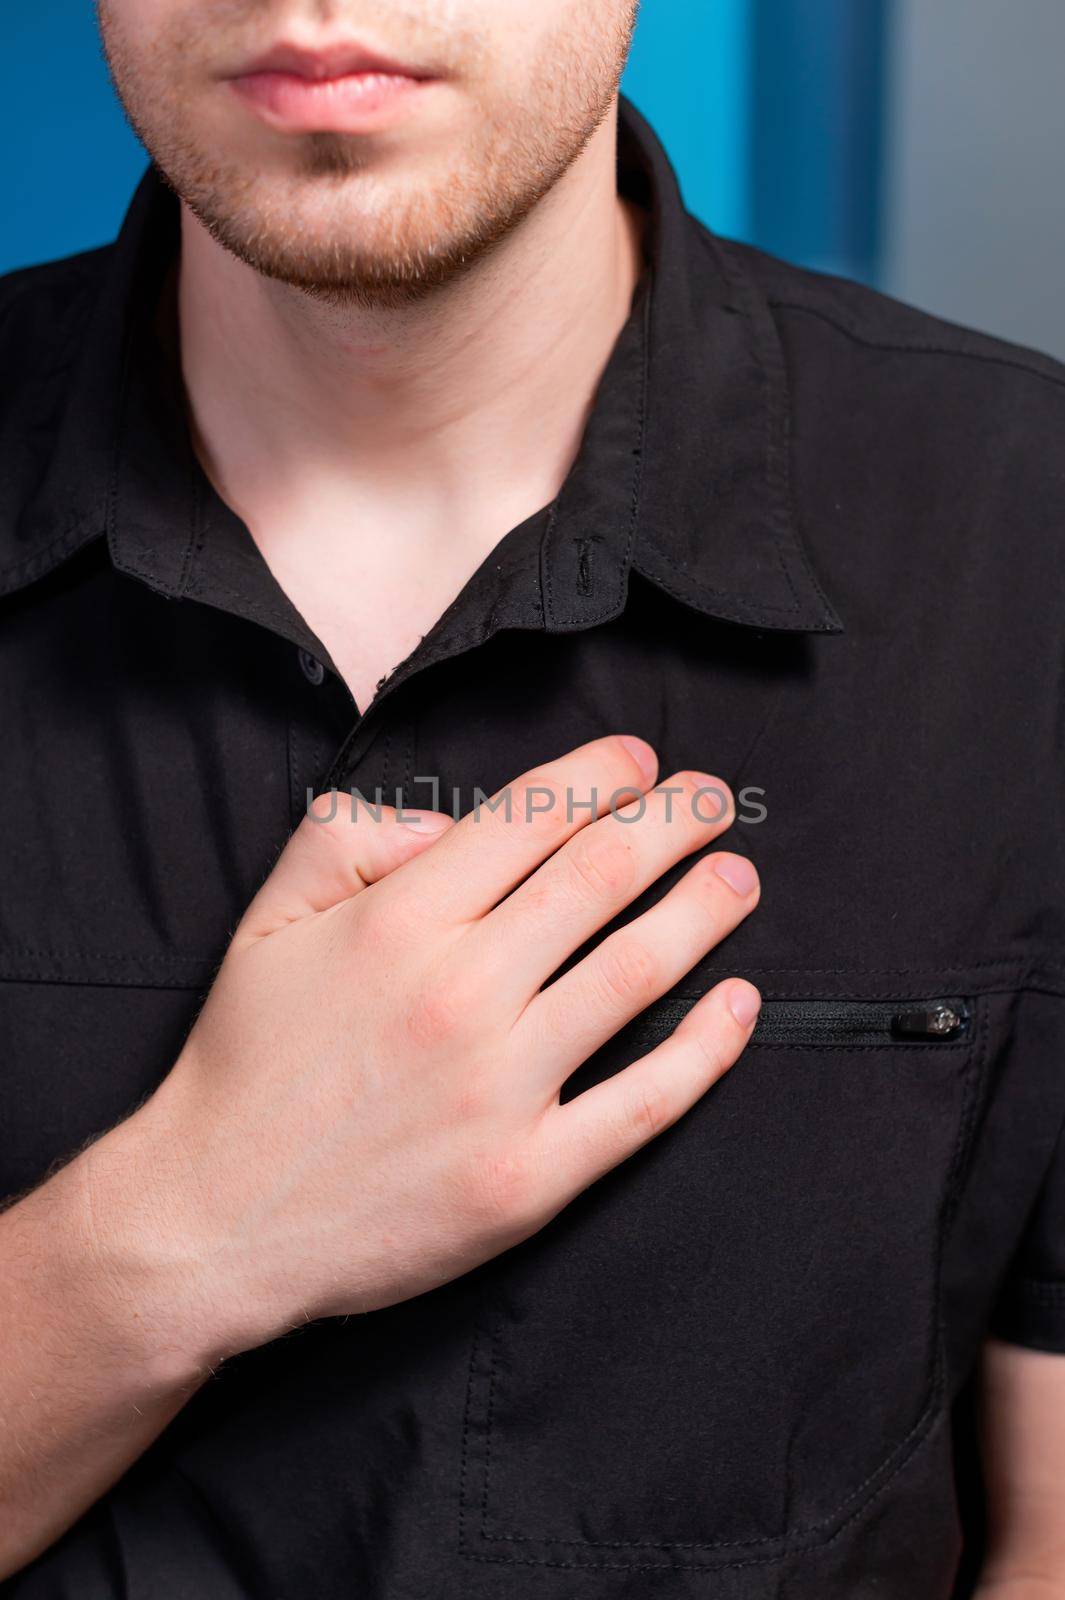 A young man stands and makes himself a lymphatic massage with his hand in the chest area, close-up.